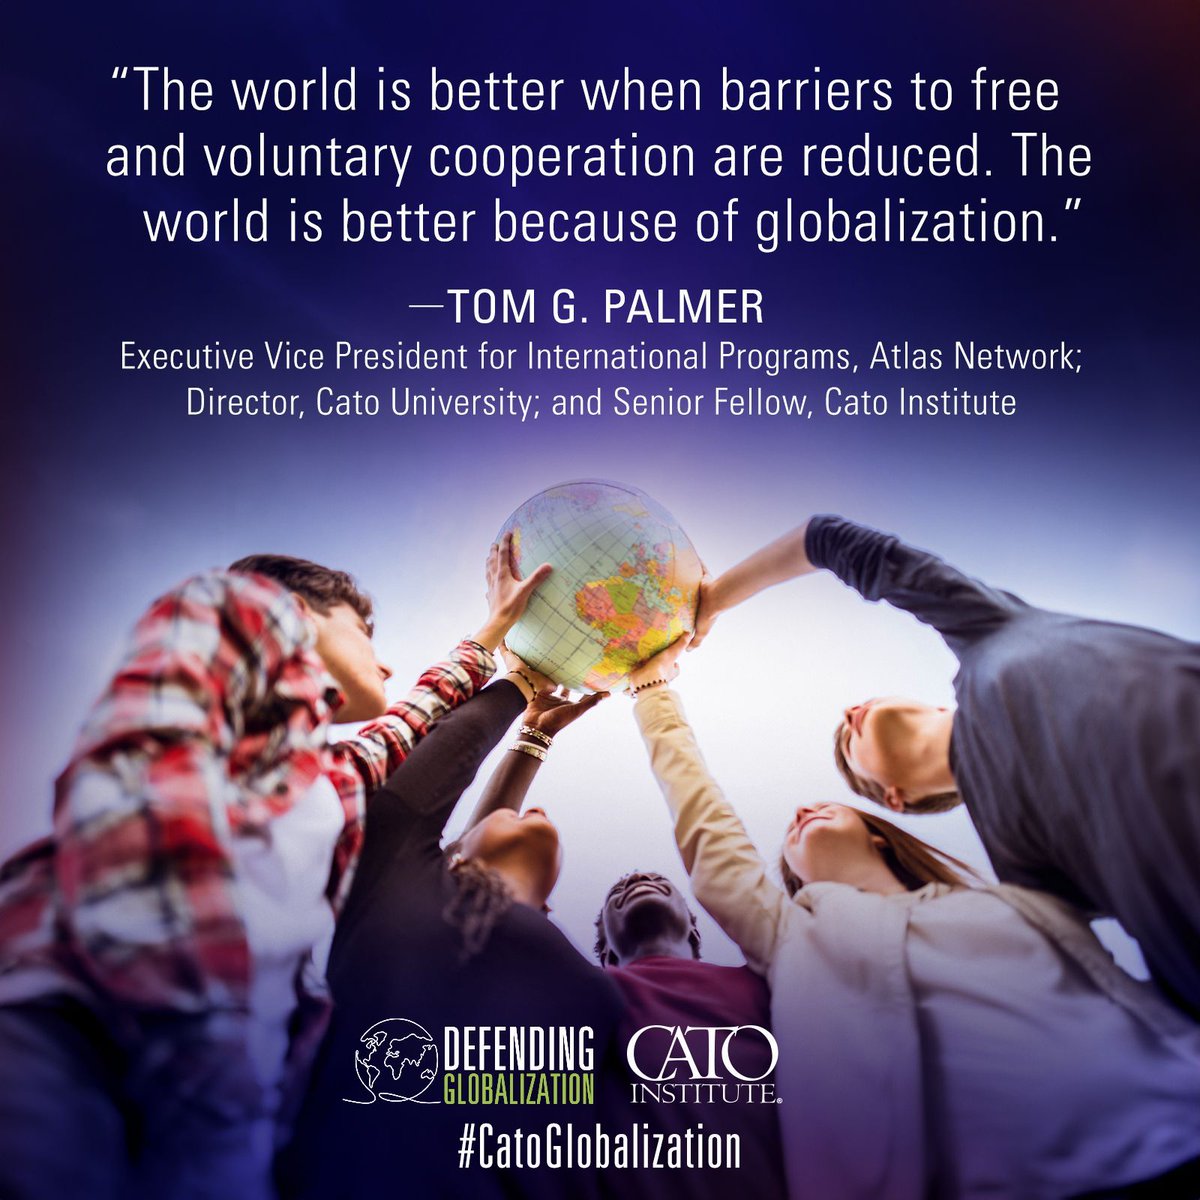 Since the days of Plato, people have denounced globalization as immoral. Yet, rigorous thinking and empirical research refute, one by one, attacks on globalization in the name of morality. @tomgpalmer explains... cato.org/publications/m… #CatoGlobalization